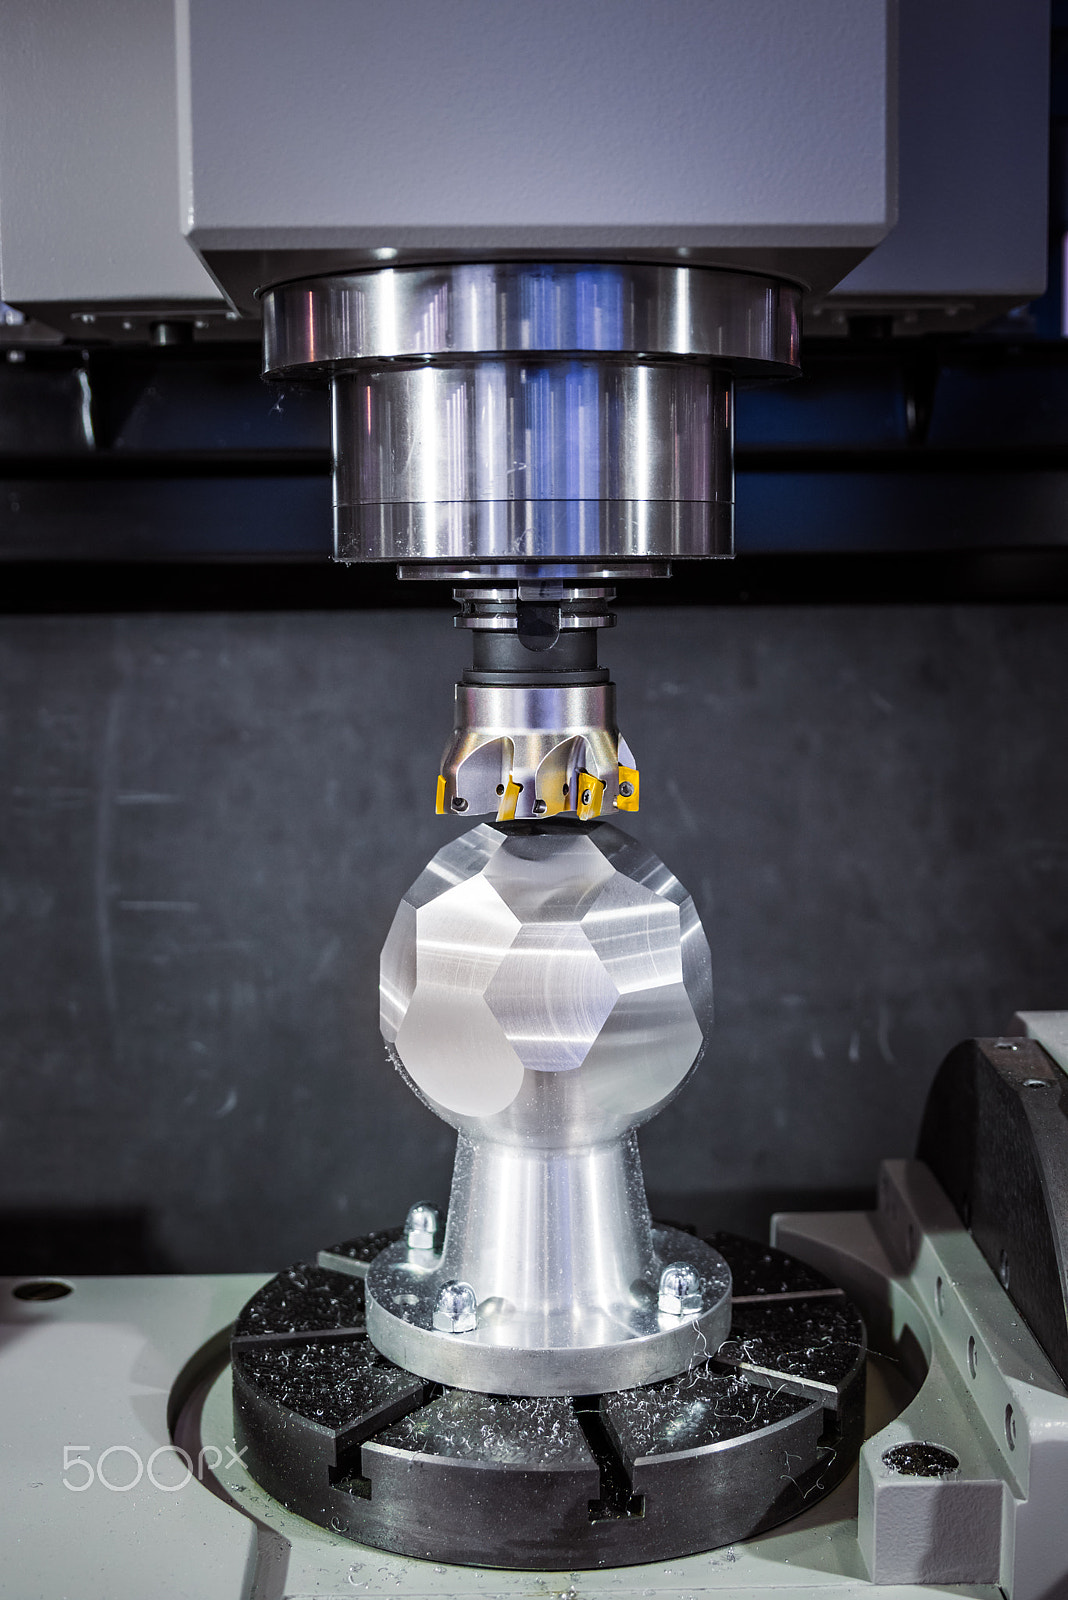 Sony a7R II sample photo. Metalworking cnc milling machine. photography